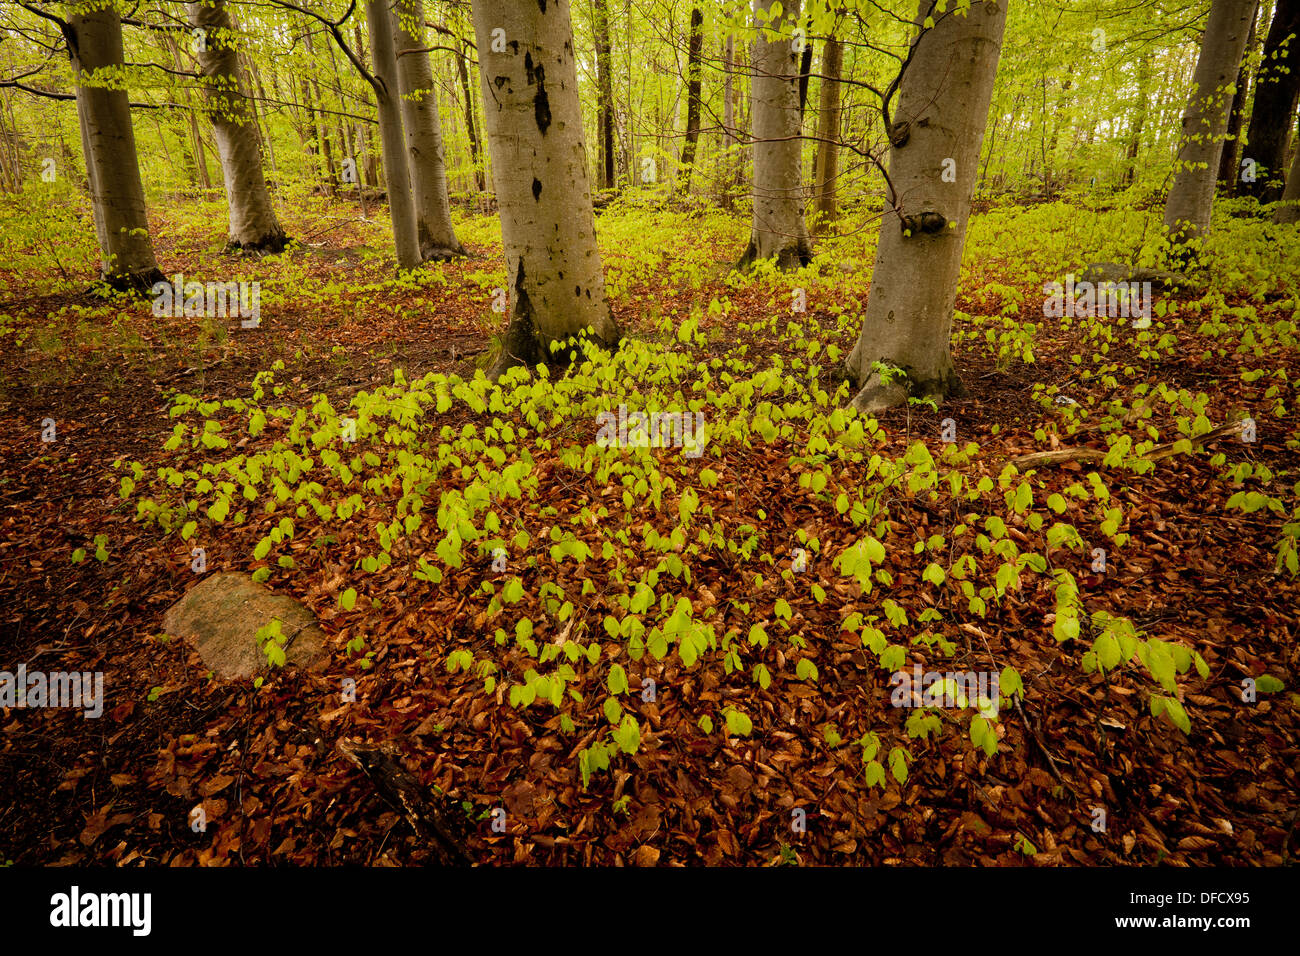 New growth in the beech forest at Alby on the island Jeløy, Moss kommune, Østfold fylke, Norway. Stock Photo